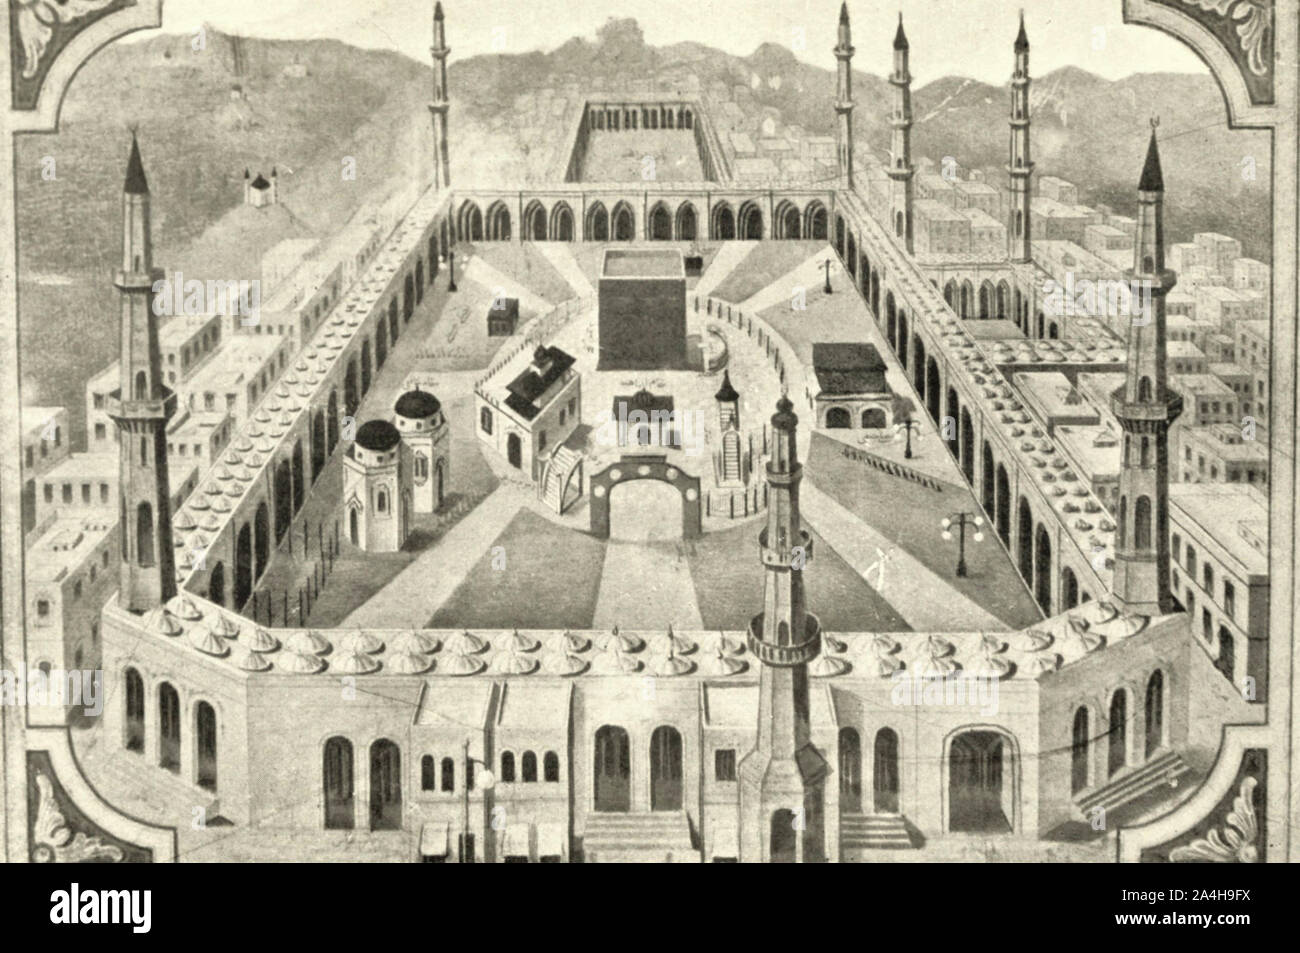 The Harem, showing the Kabah, and the other sanctuaries within the Harem - From an old Indian Illustration Stock Photo